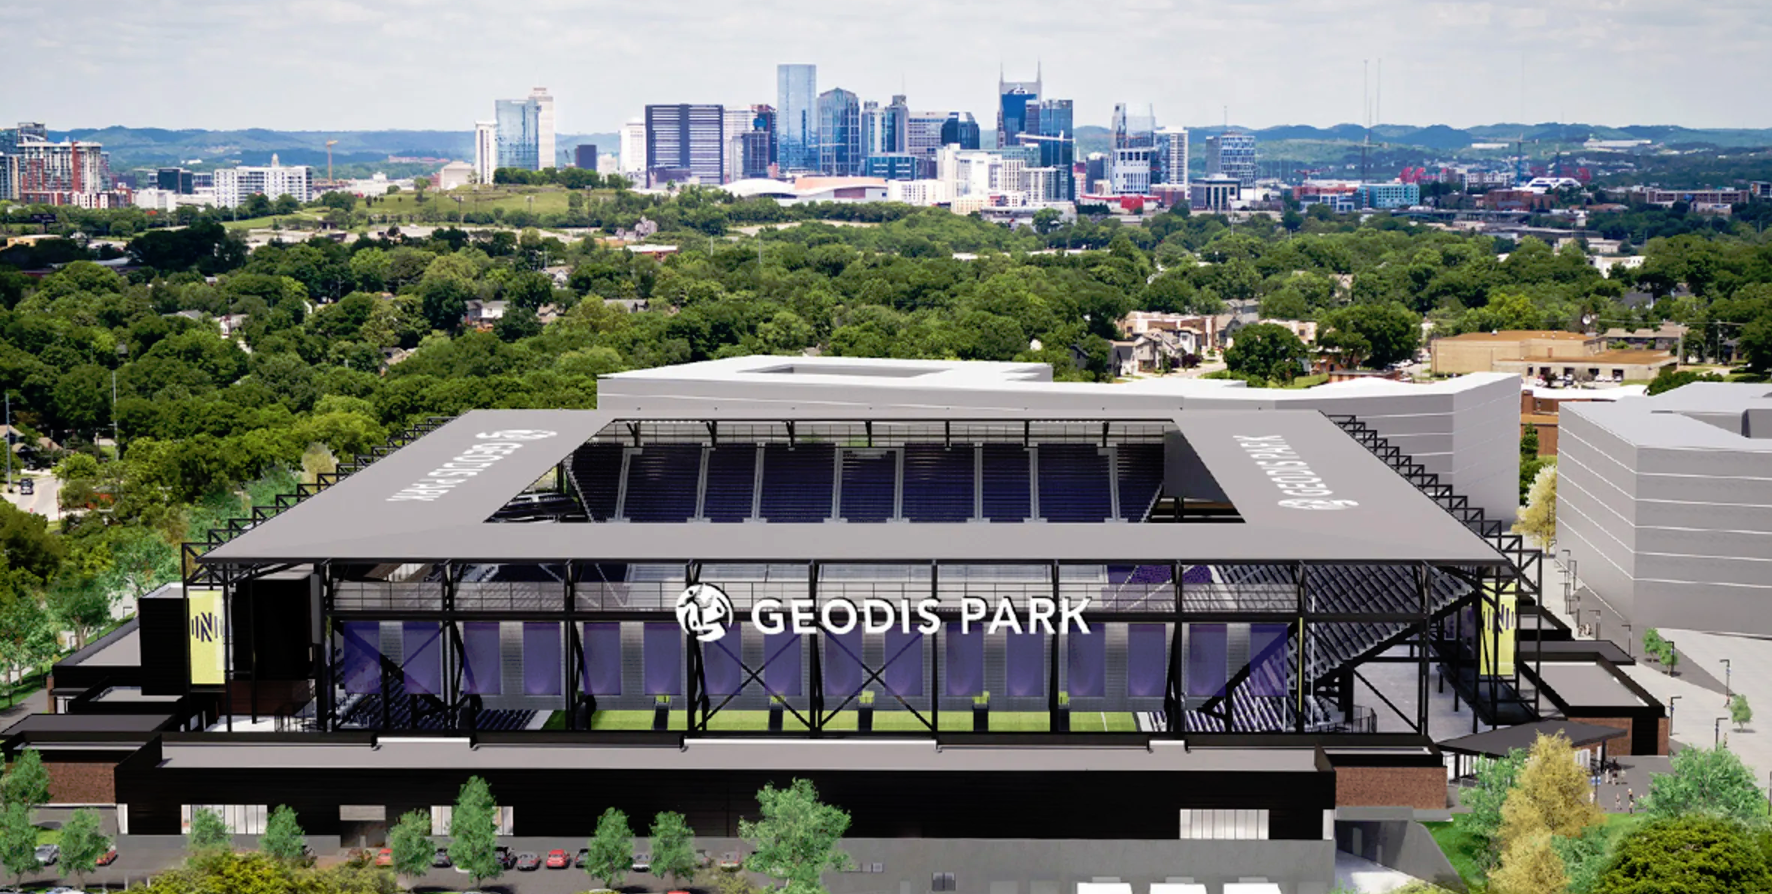 The new GEODIS Park Soccer Stadium and Entertainment Fairgrounds in Nashville, TN, were built by Mortenson using DCW technology